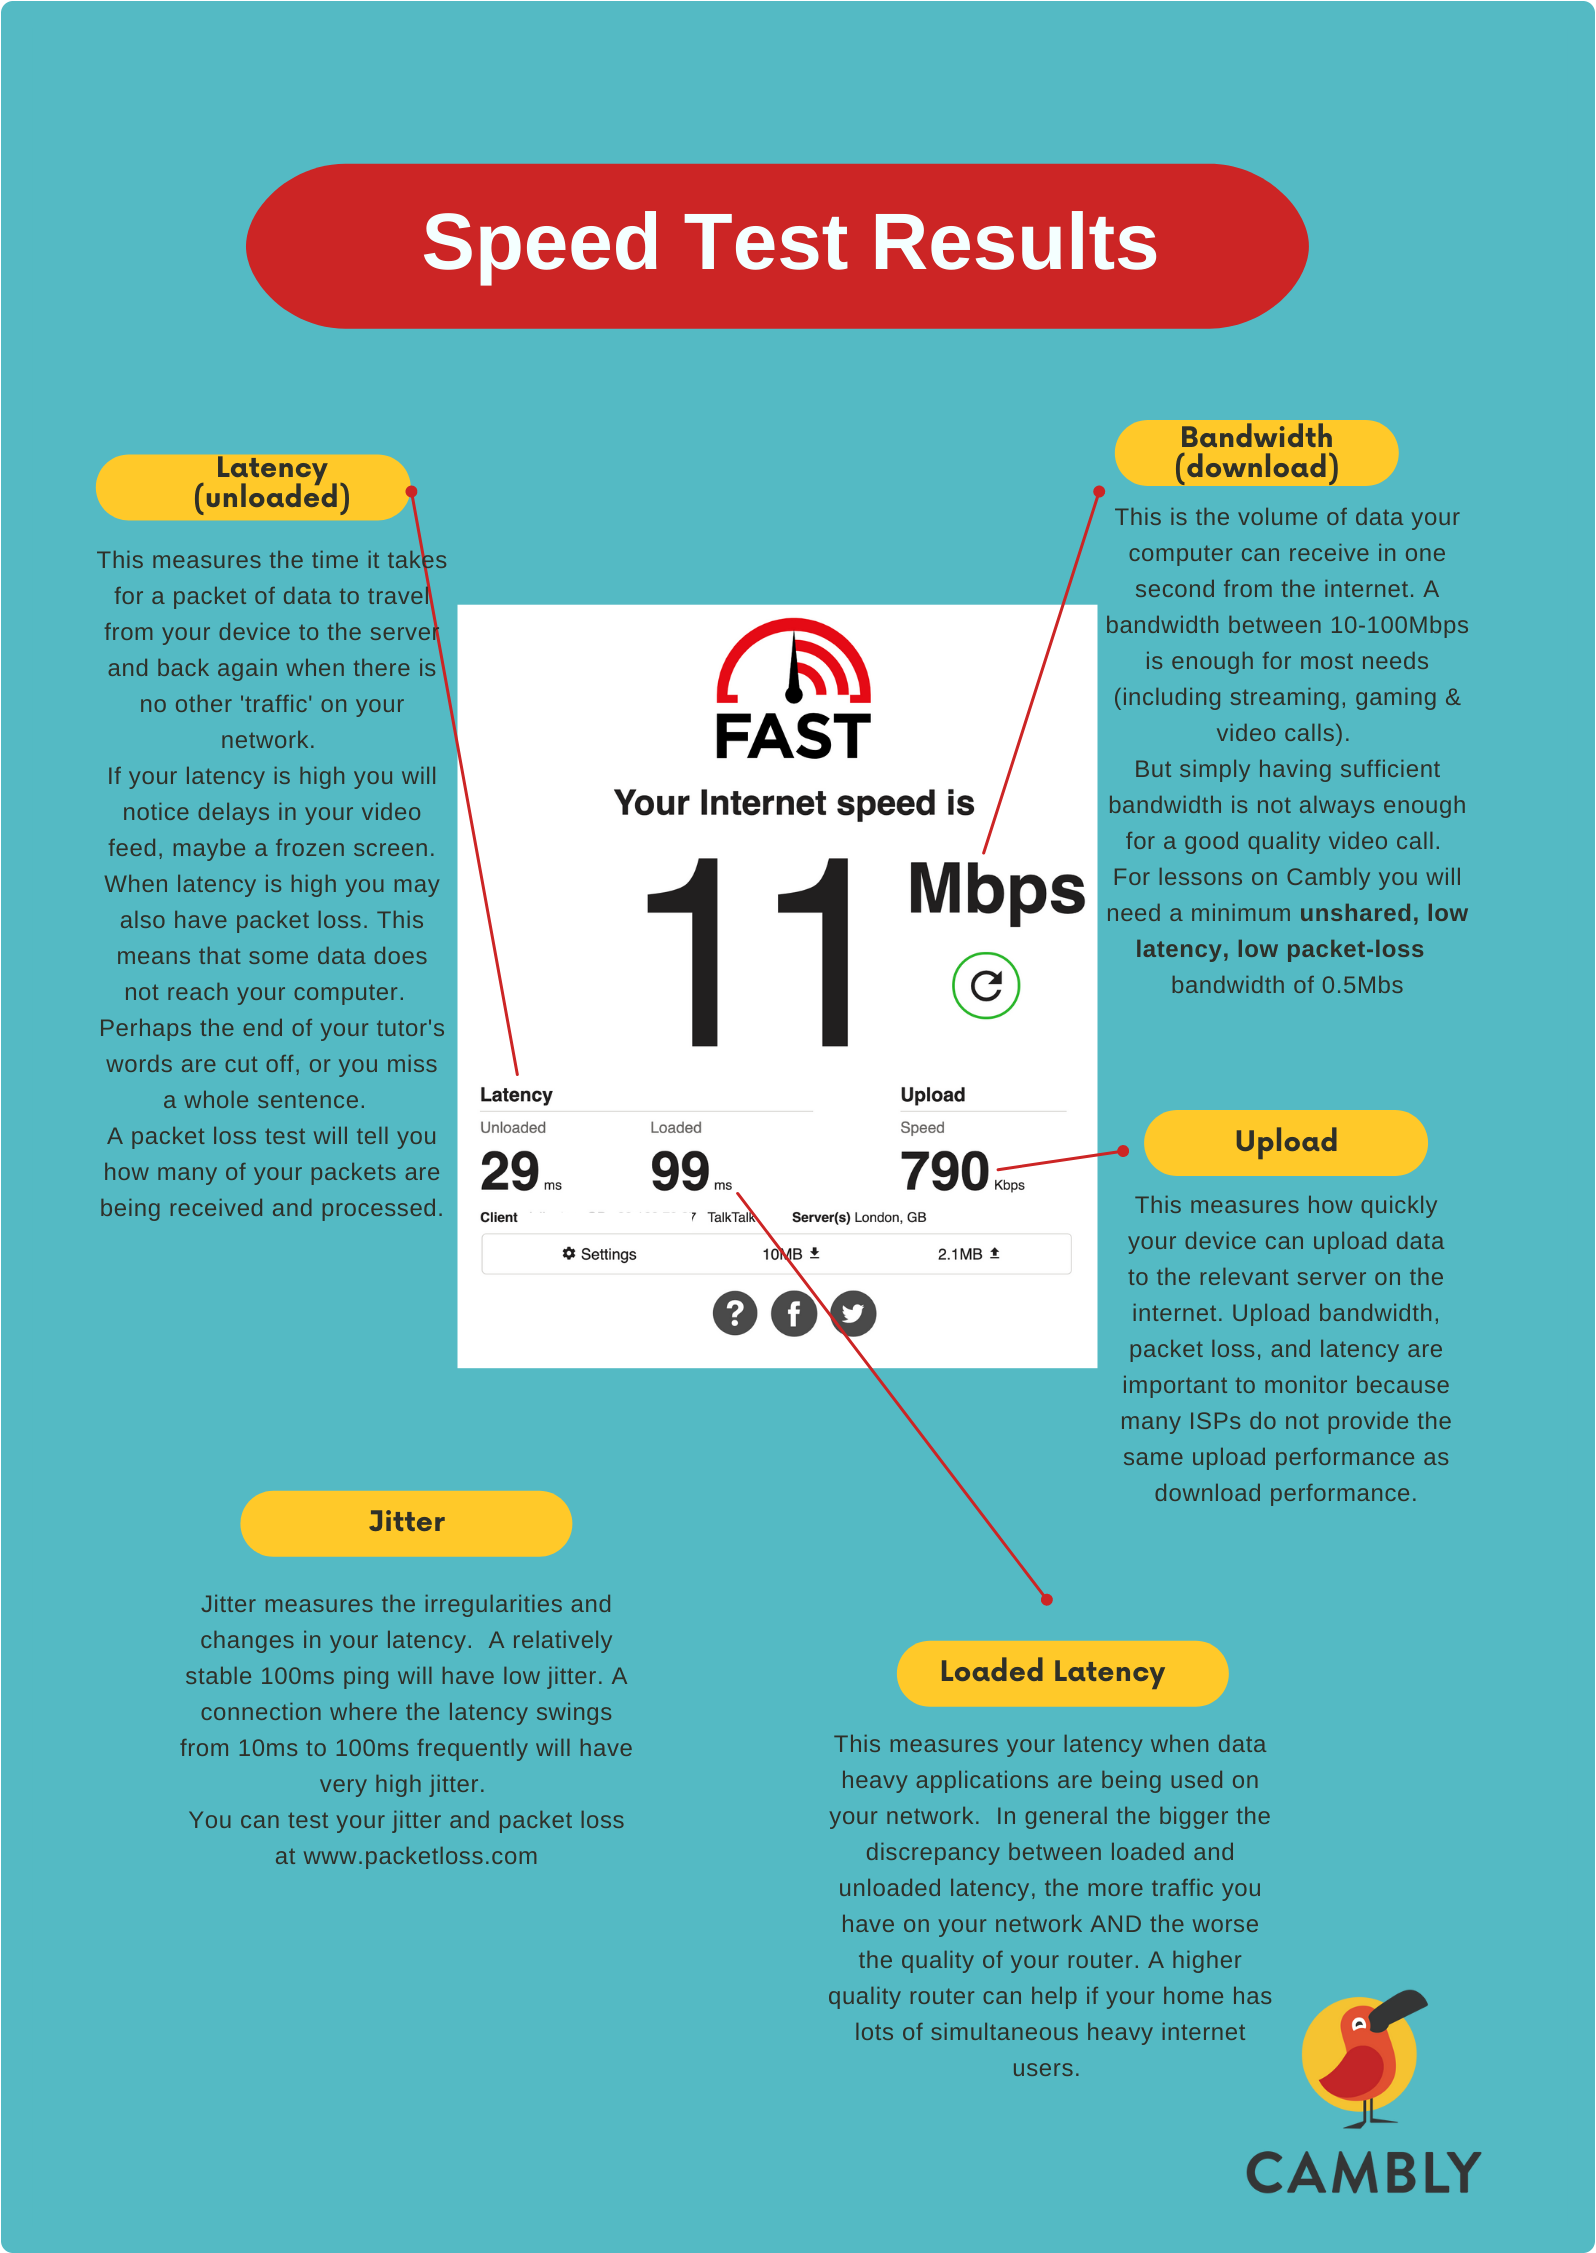 speed test result infographic curved corners.png